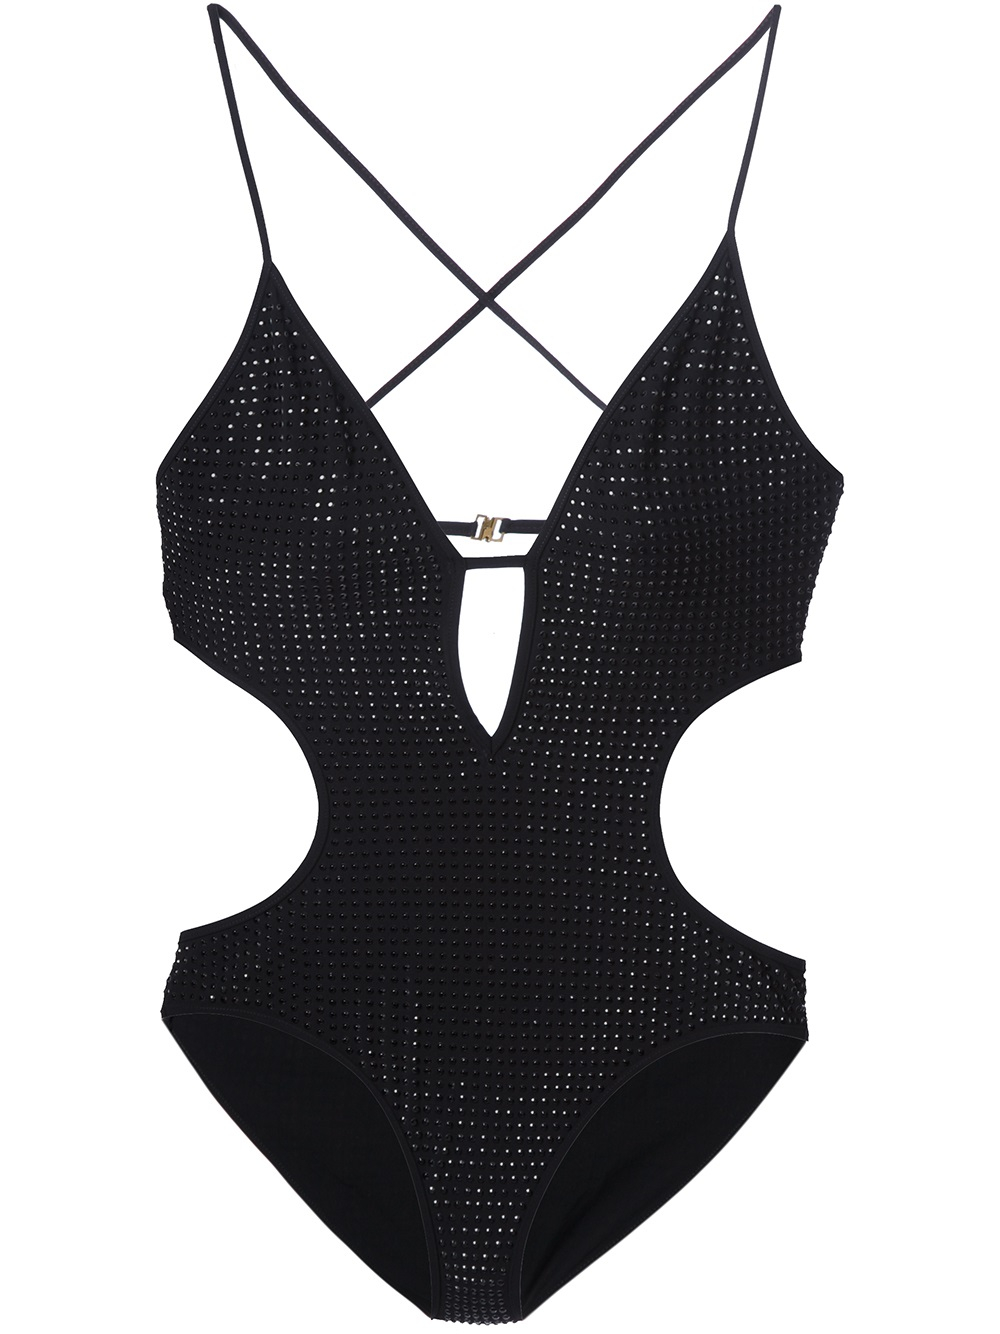 Gucci Embellished Swim Suit in Black - Lyst